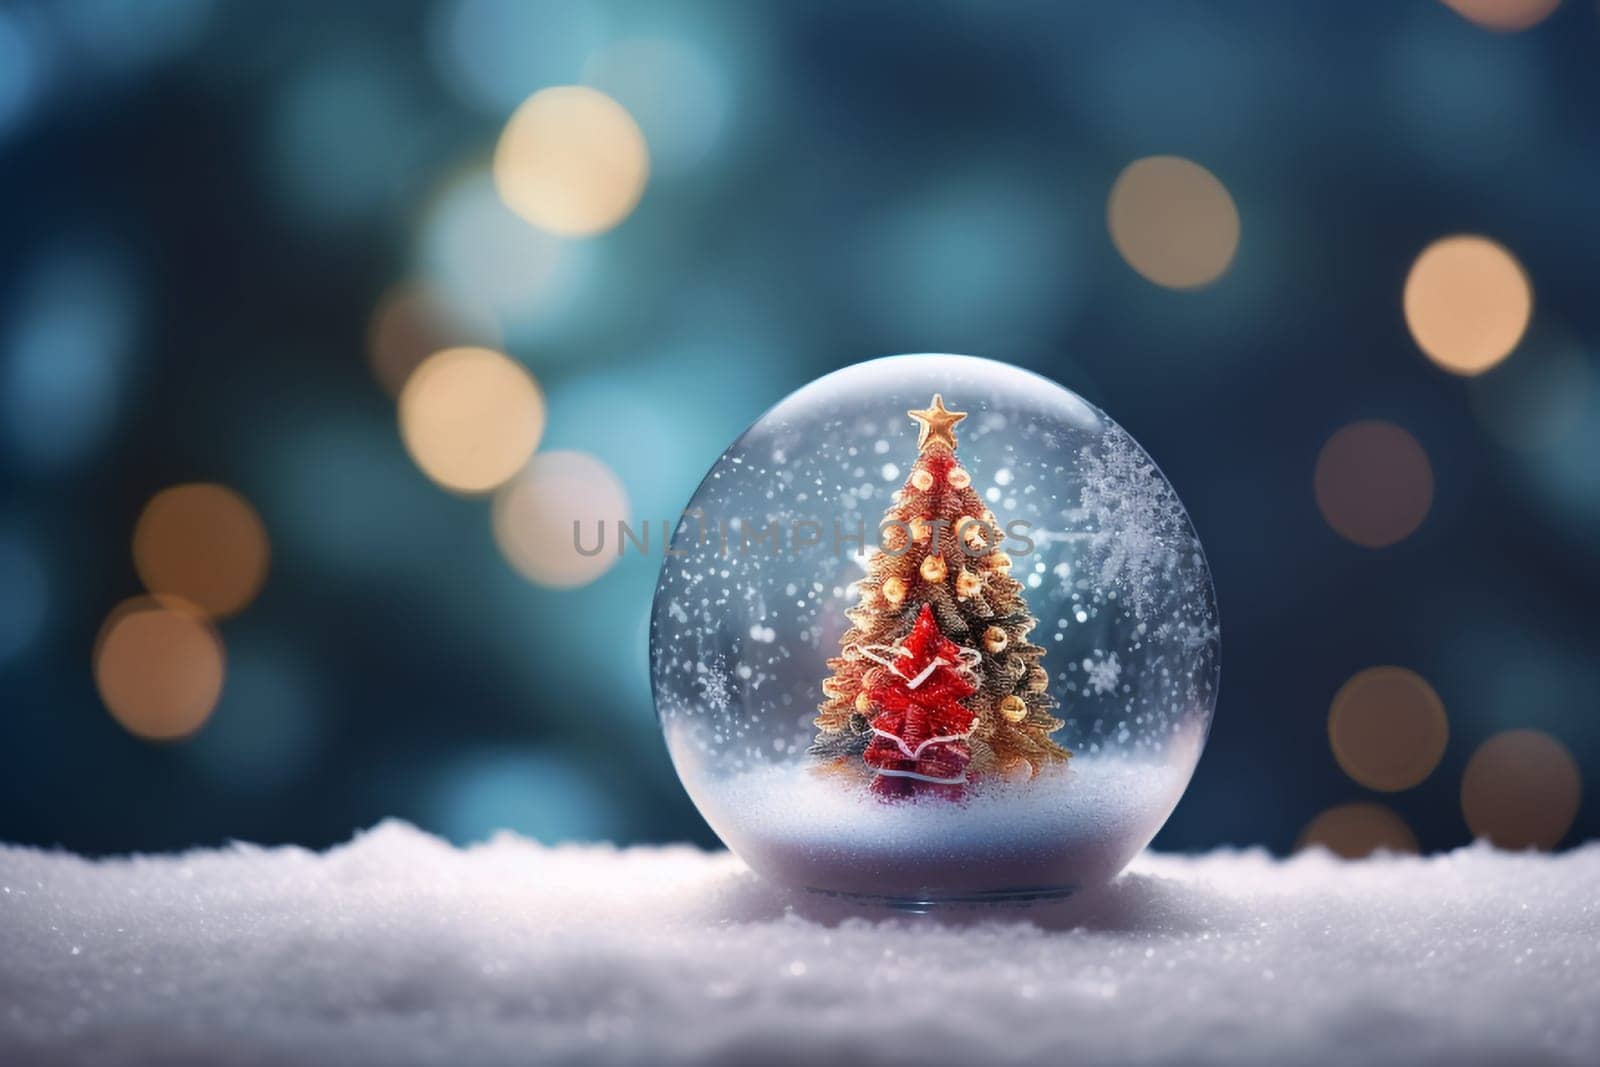 One Christmas ball on blurred backgrounds with Christmas trees inside by Ciorba